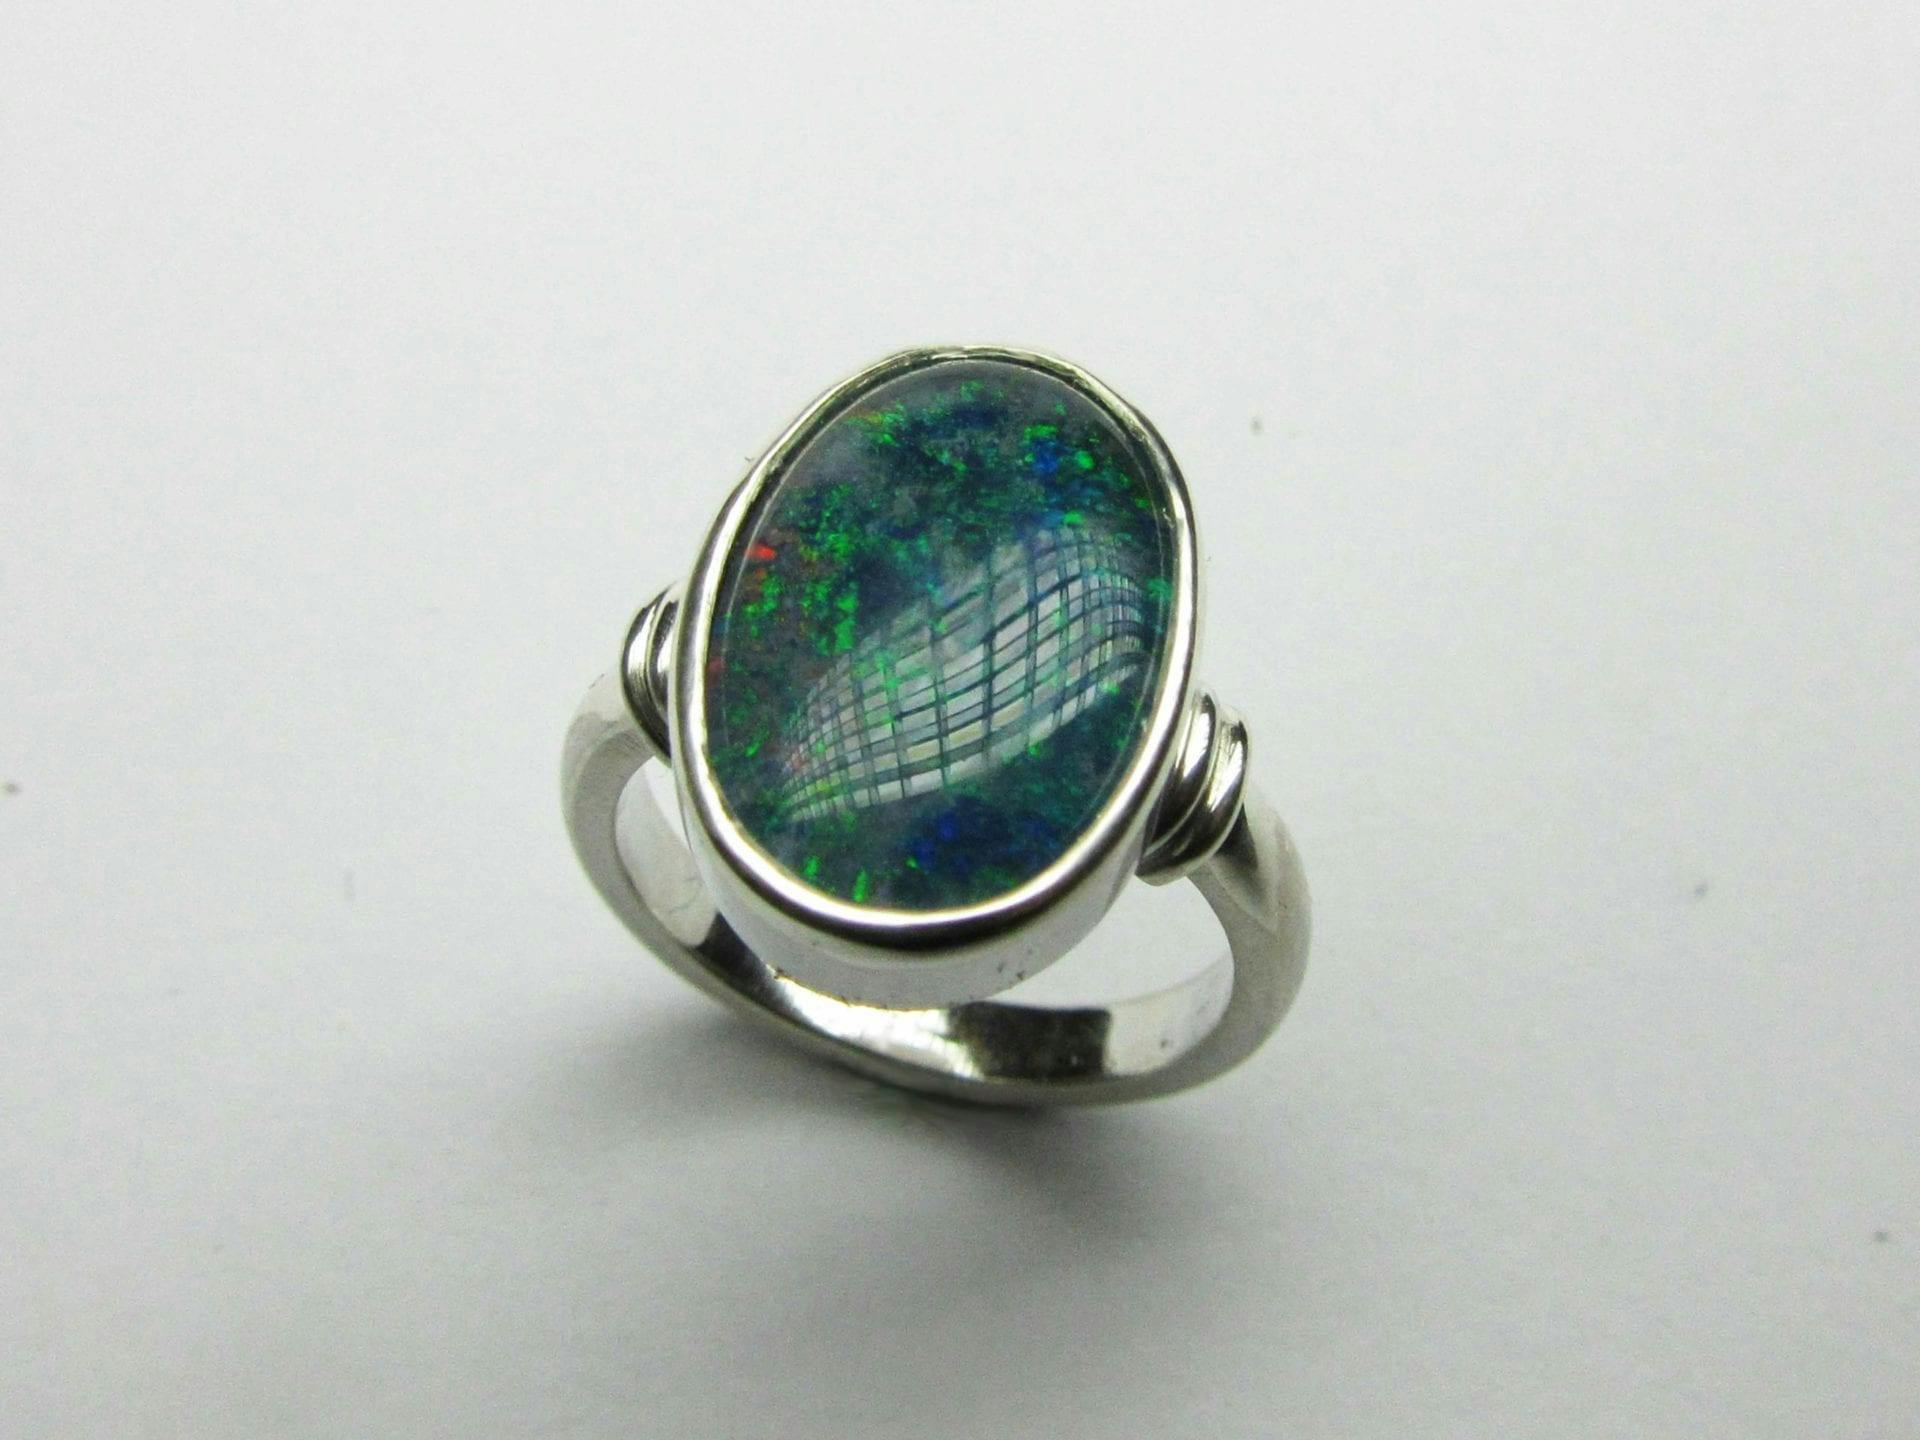 How to Make a Cabochon Ring With Shoulder Collars